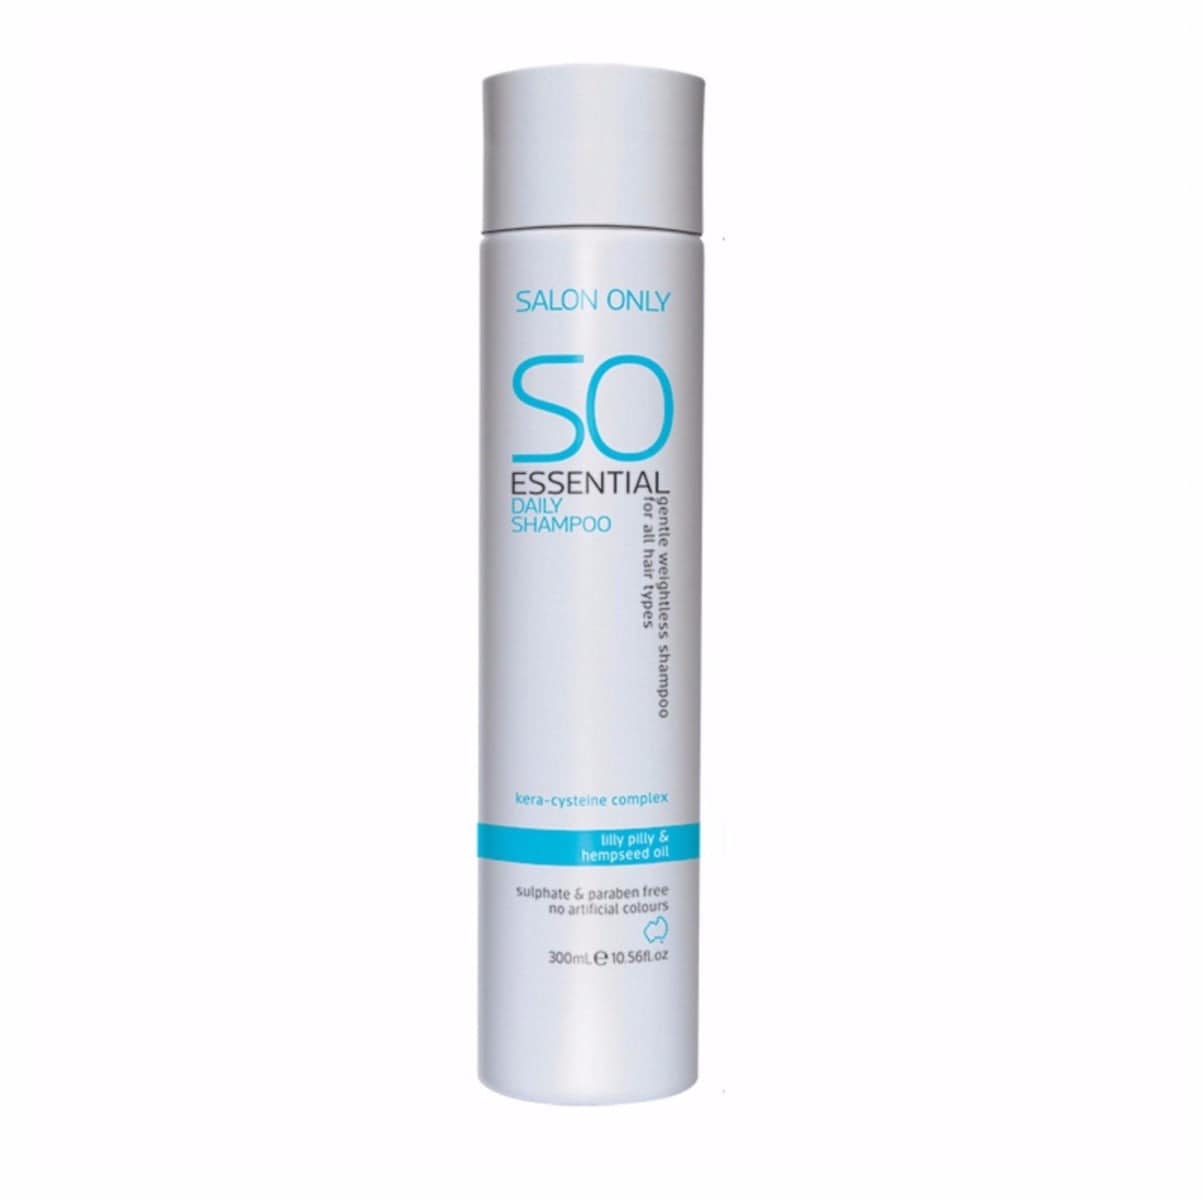 SO Salon Only Essential Daily Shampoo 300 ml - On Line Hair Depot